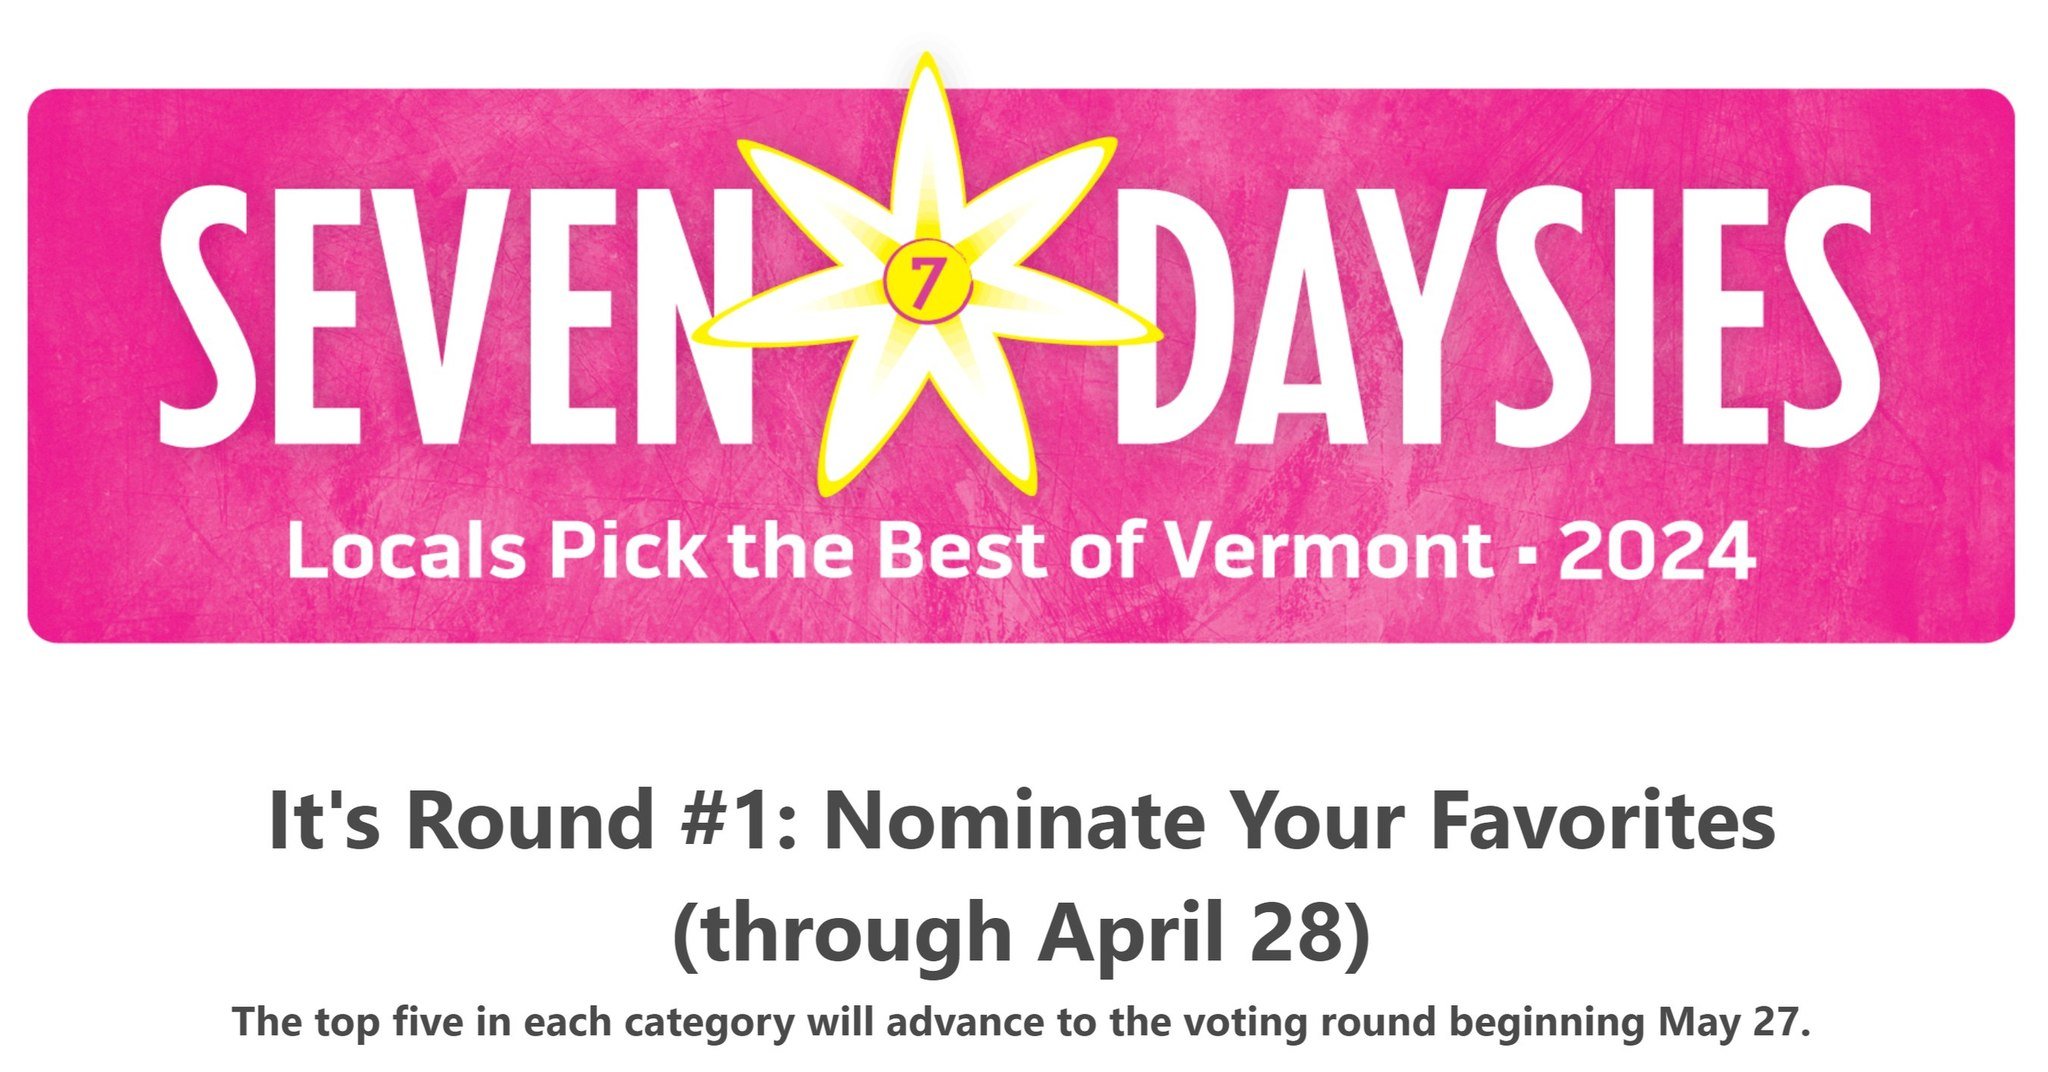 😍Share your love for River Arts by nominating us for &quot;Best Nonprofit Organization&quot; in Vermont!

Nominations through April 28!

We appreciate your time &amp; continuous support ❤️

Seven Days #bestnonprofit #bestnonprofitorganization #river